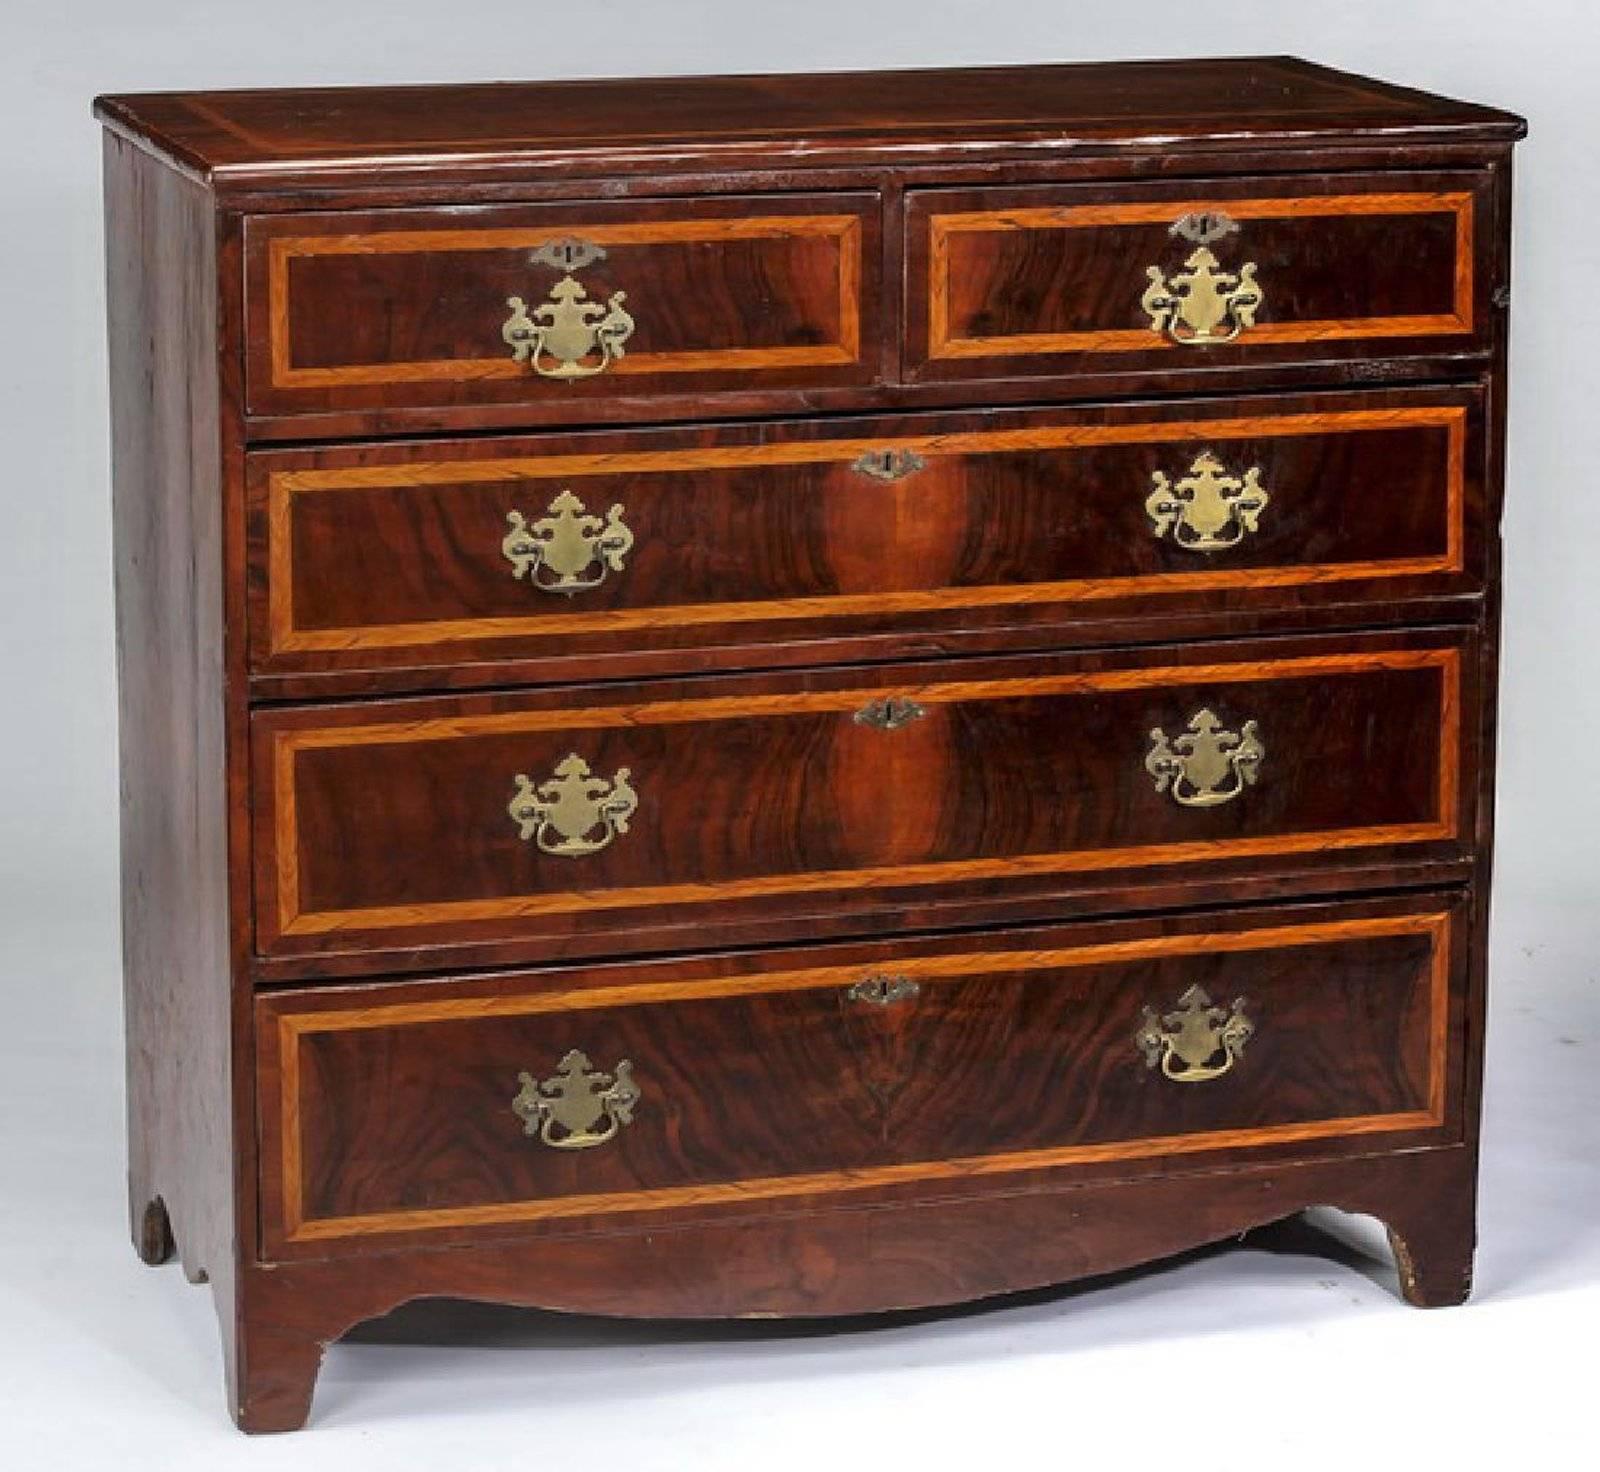 English walnut chest of drawers with stain wood banding on top and drawers, circa 1820, burl walnut with unusual satin wood banding. Beautiful golden color with nice finish, Chippendale pulls and escutcheons, original feet.